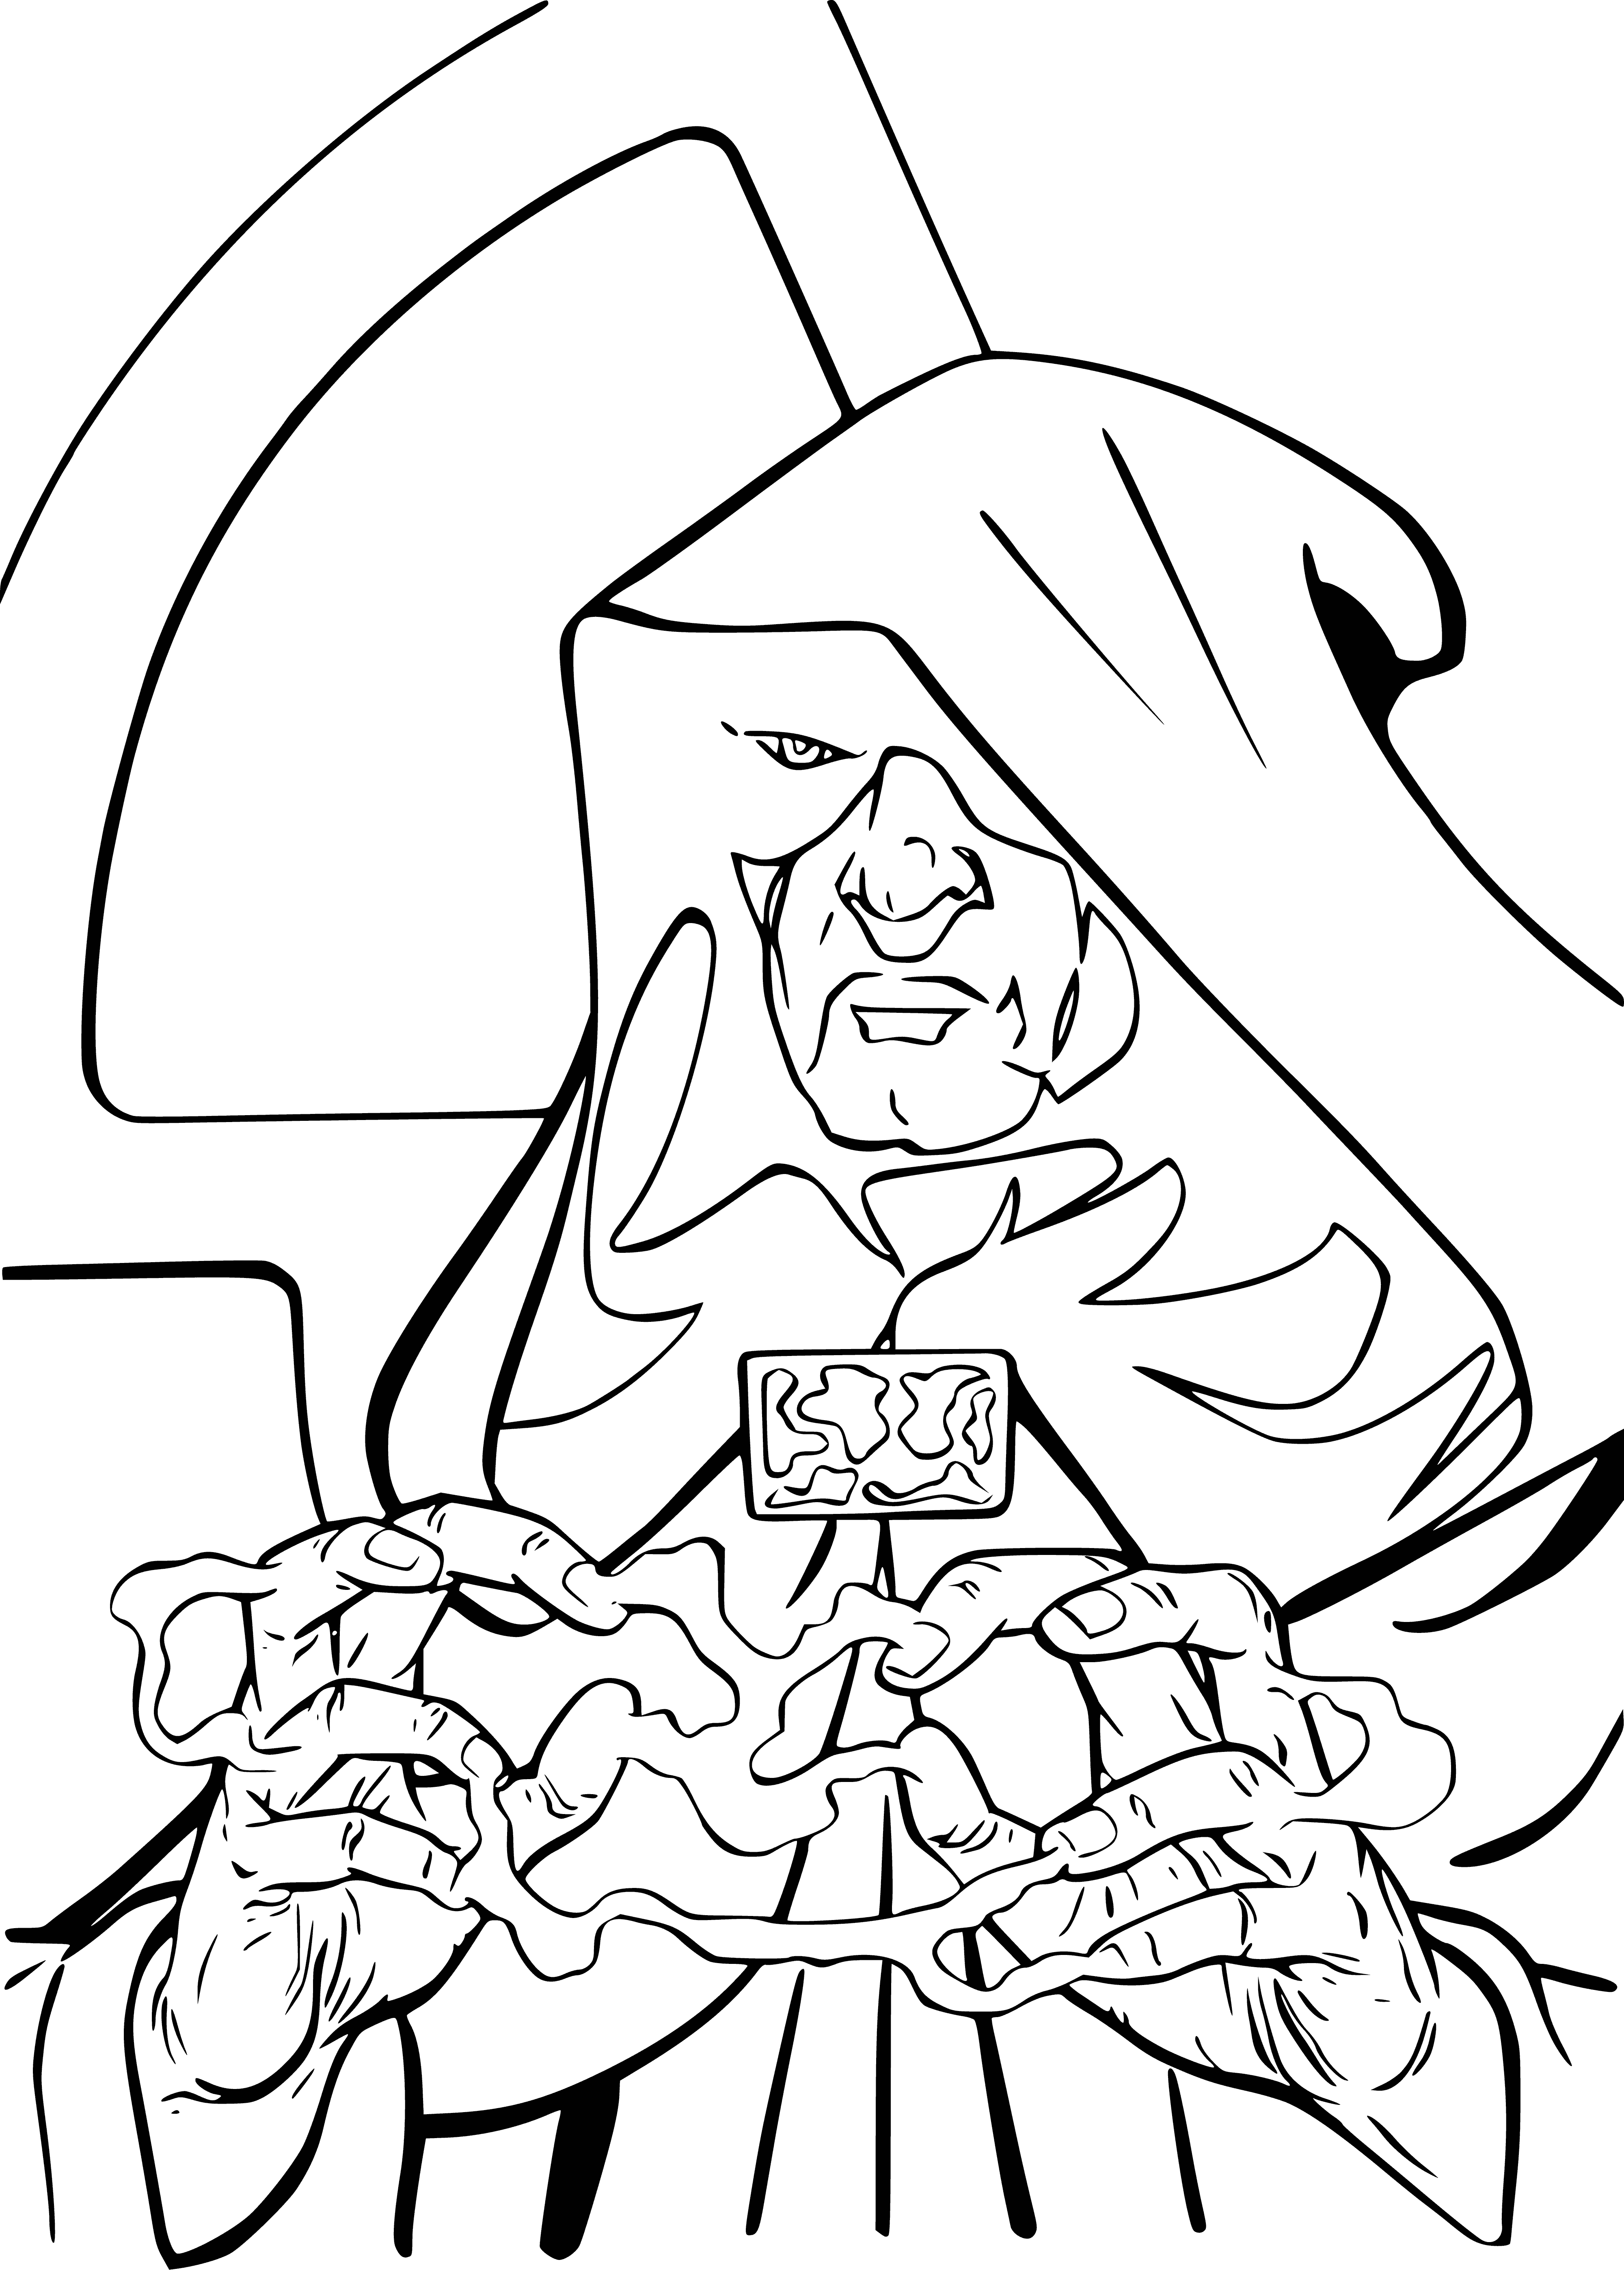 coloring page: Palpatine and two clone troopers stand in window overlooking Coruscant. He is an elderly man wearing a black robe, flanked by troopers in white armor, armed with blaster rifles.